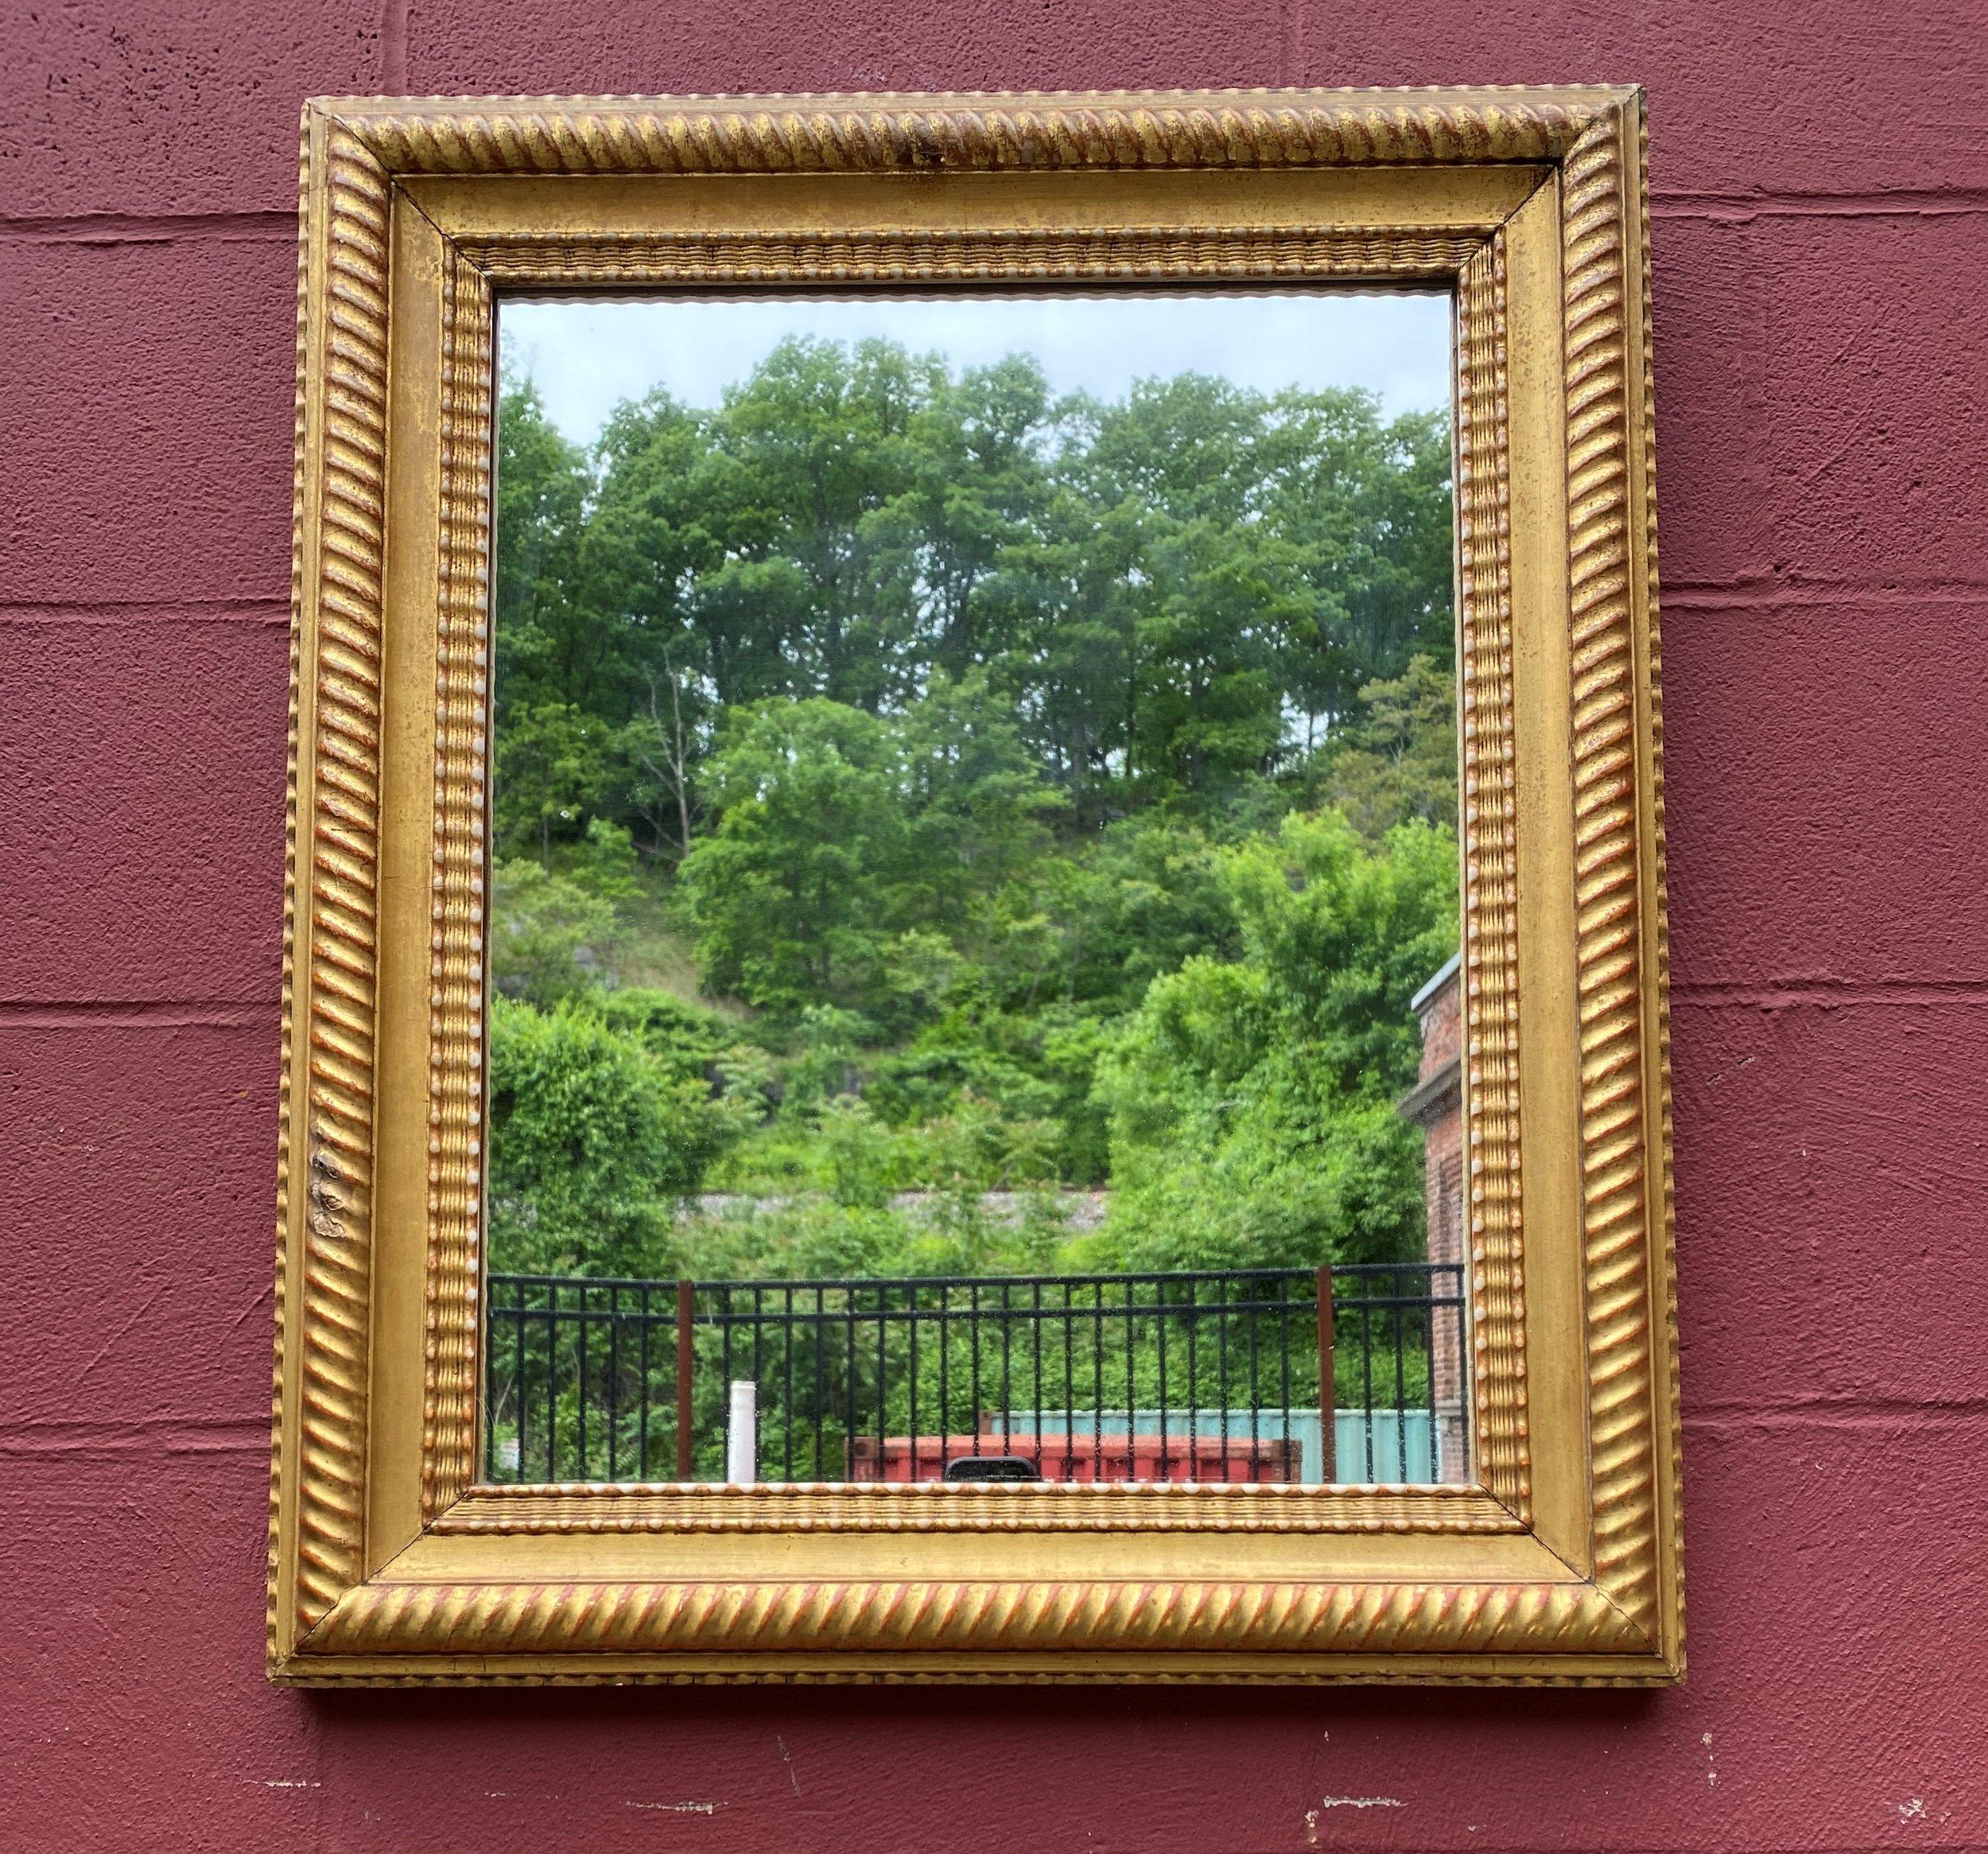 French  gilt wood mirror with original wood back dating back to early 1900’s. This mirror can  be hung horizontally or vertically is is very well made. Good vintage condition appropriate with age. 

Ref #: DM0321-05

Dimensions: 30”H x 25.25